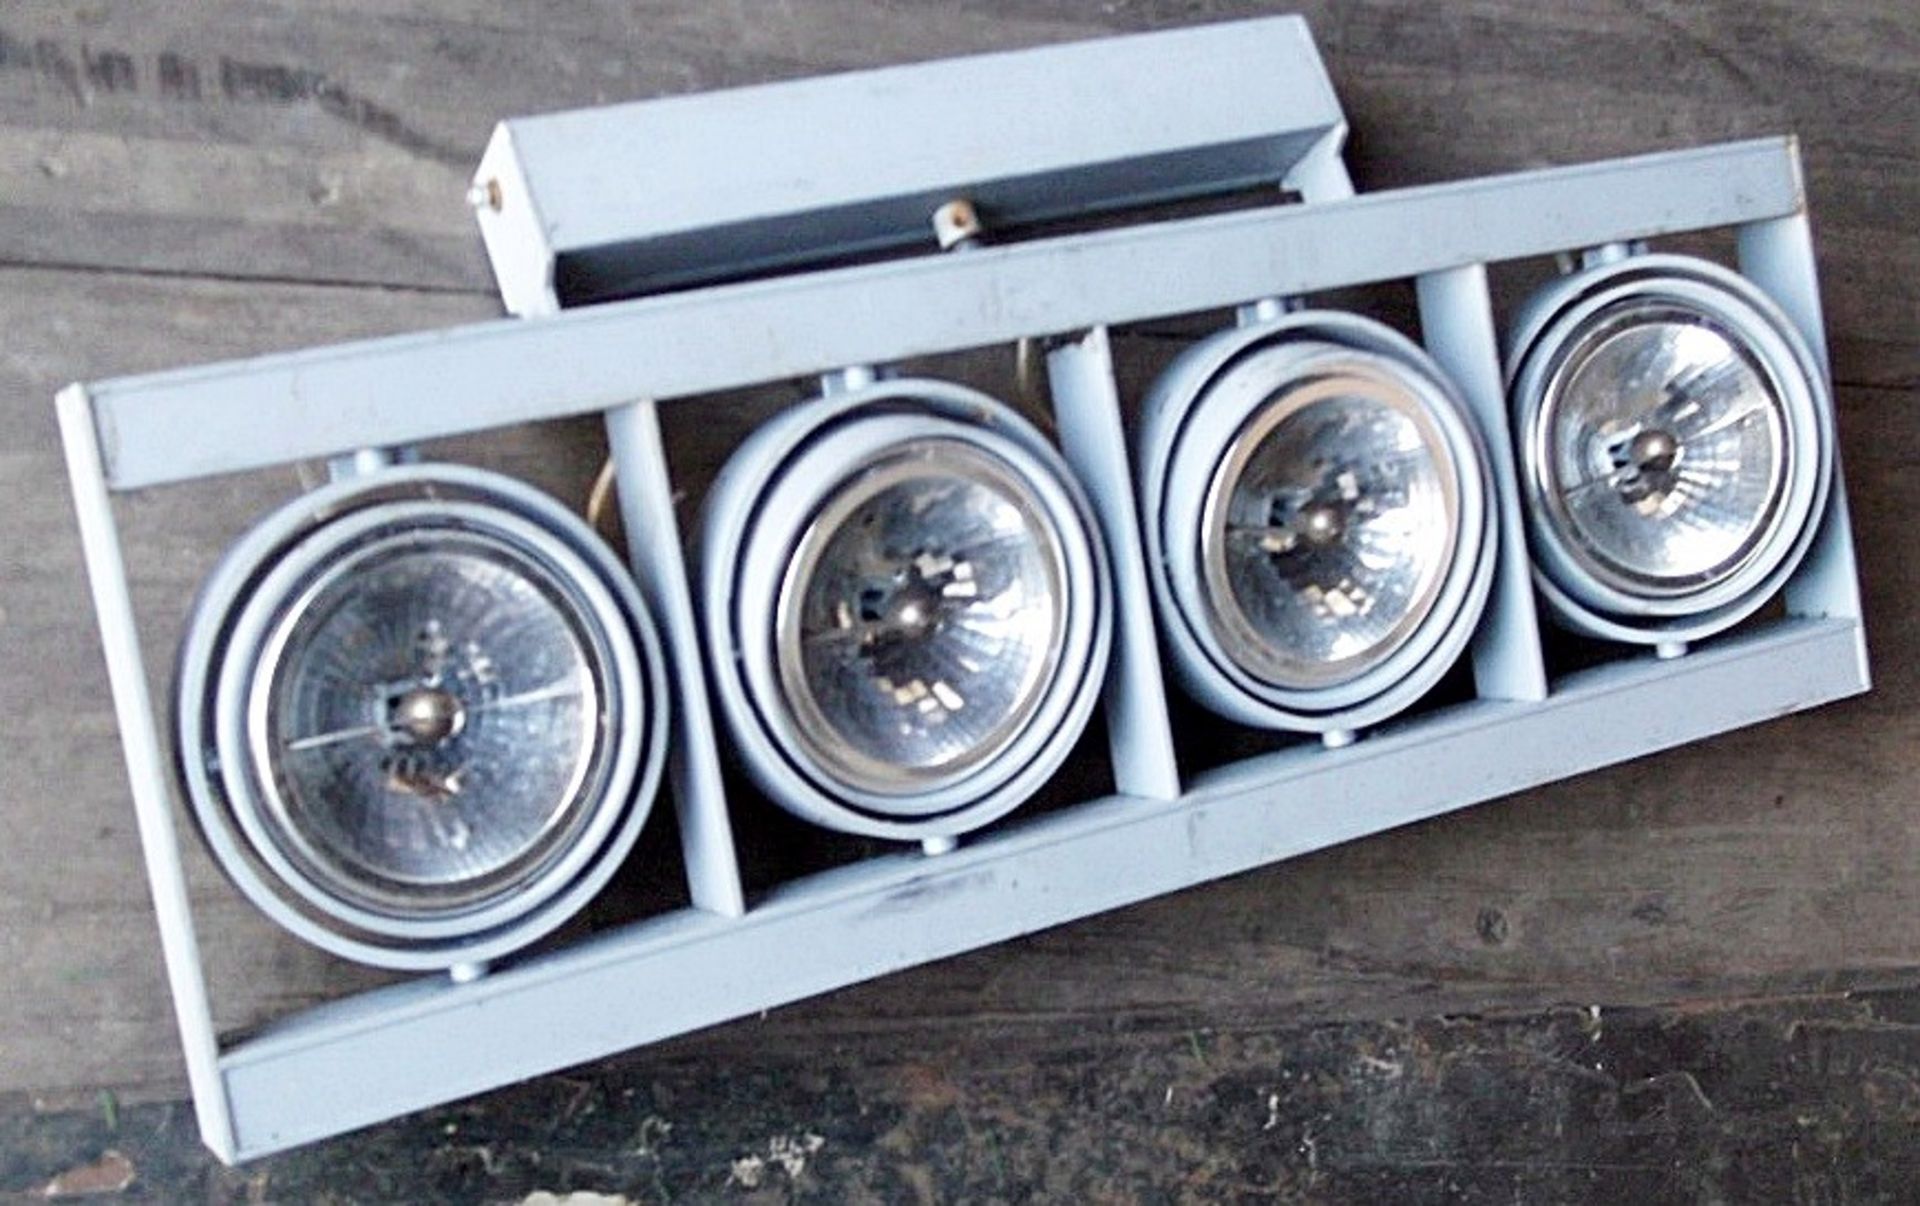 Job Lot Of Lighting - Lot Includes 12 x Modules Of 4 Lights - Each Block: 63 x 21cm - Pre-owned, - Image 3 of 5